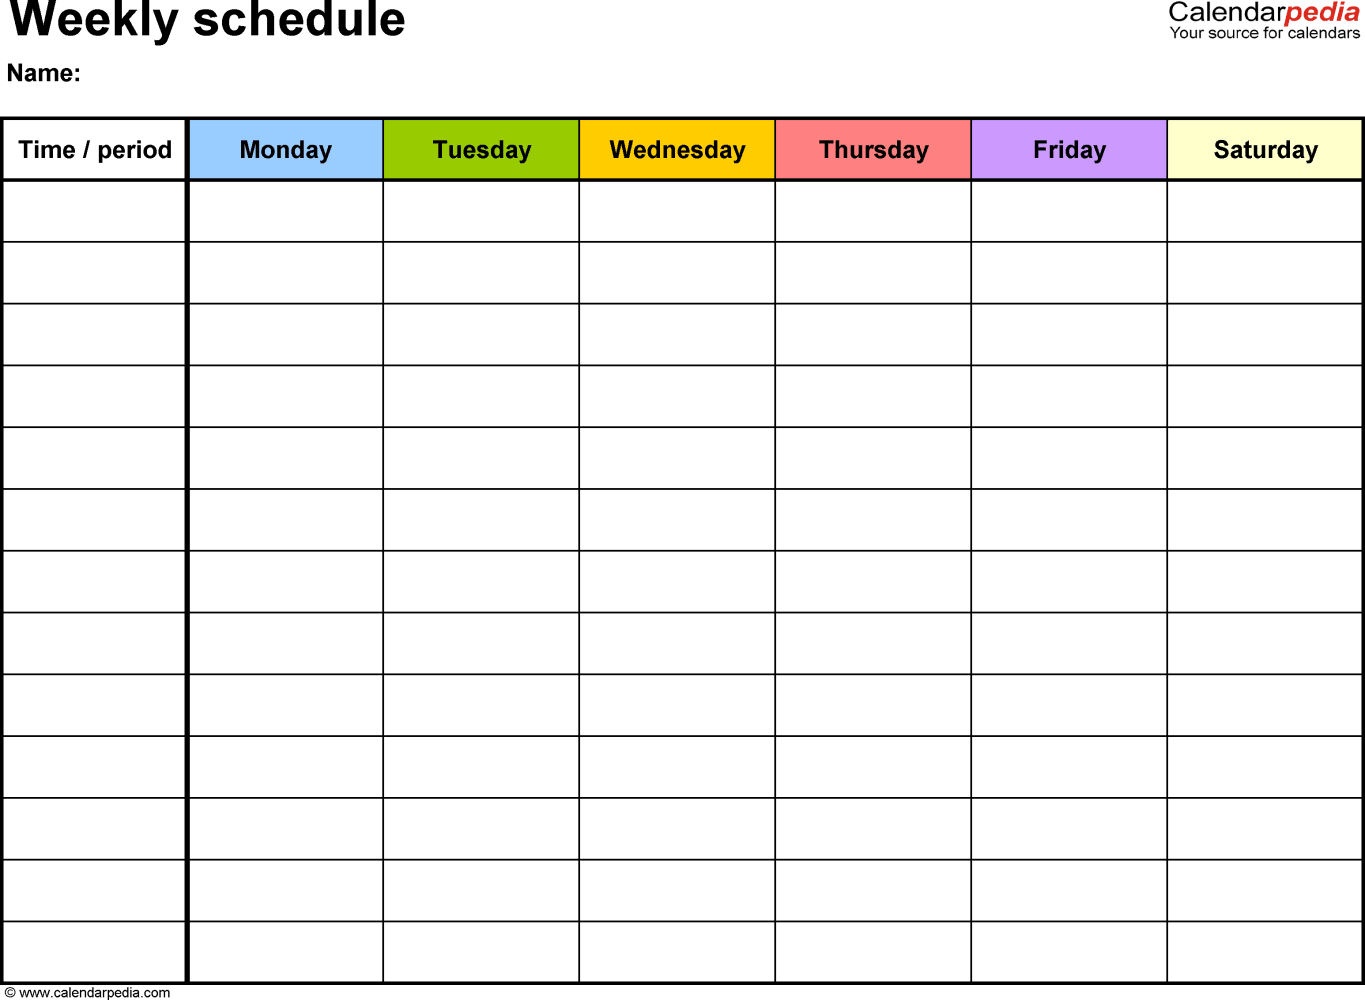 Free Weekly Schedule Templates For Excel - 18 Templates Inside Monthly Work Schedule Template Pdf